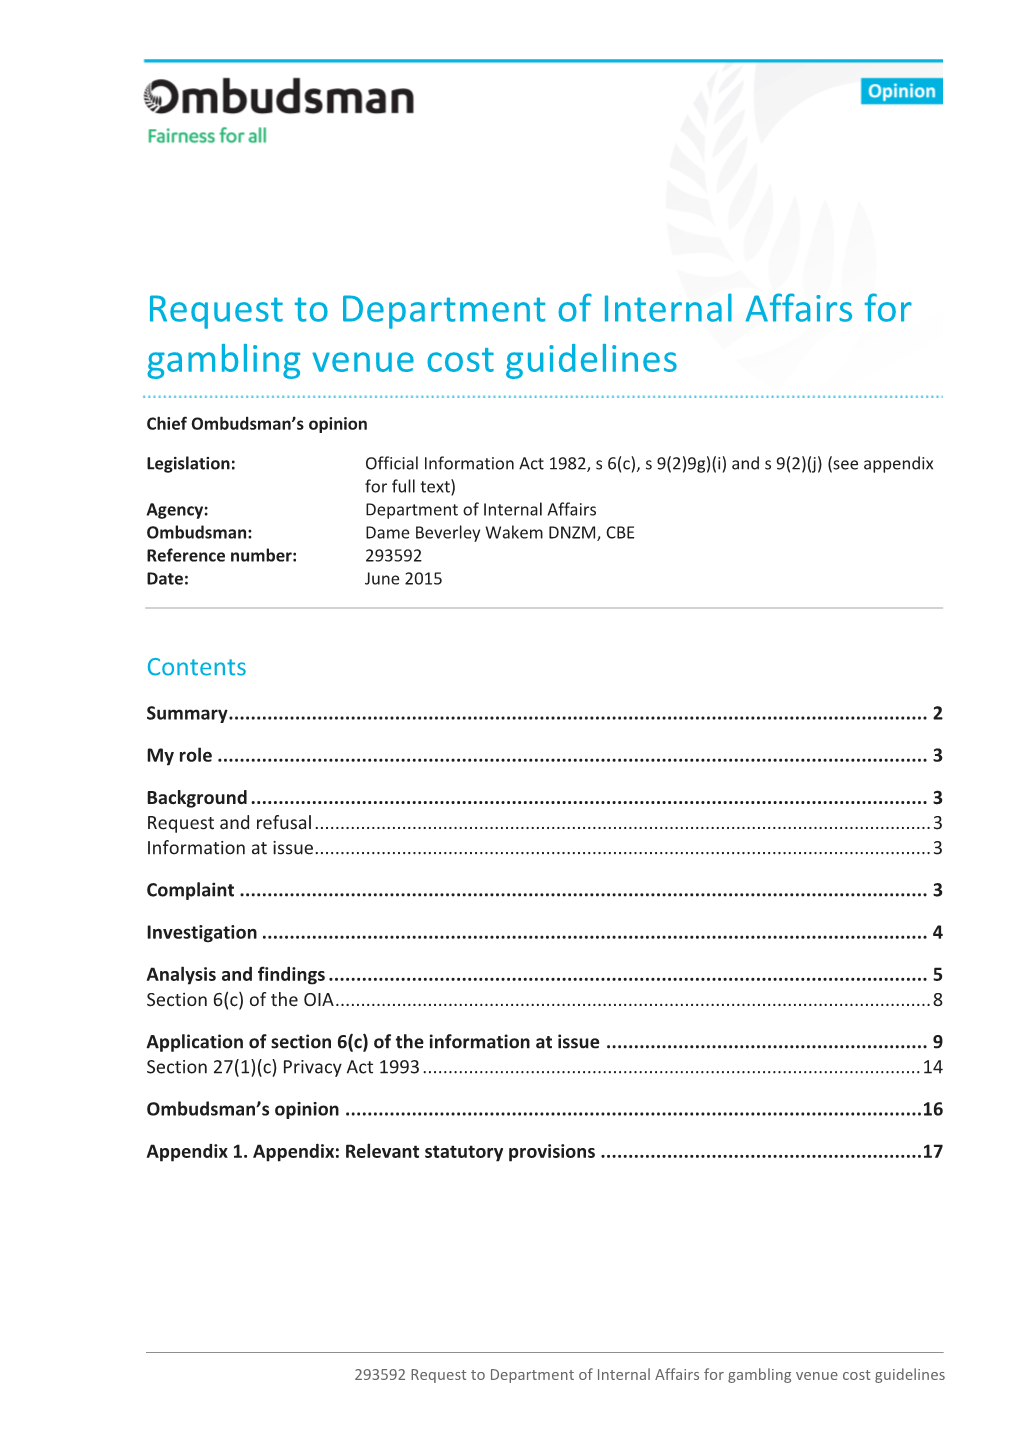 Request to Department of Internal Affairs for Gambling Venue Cost Guidelines